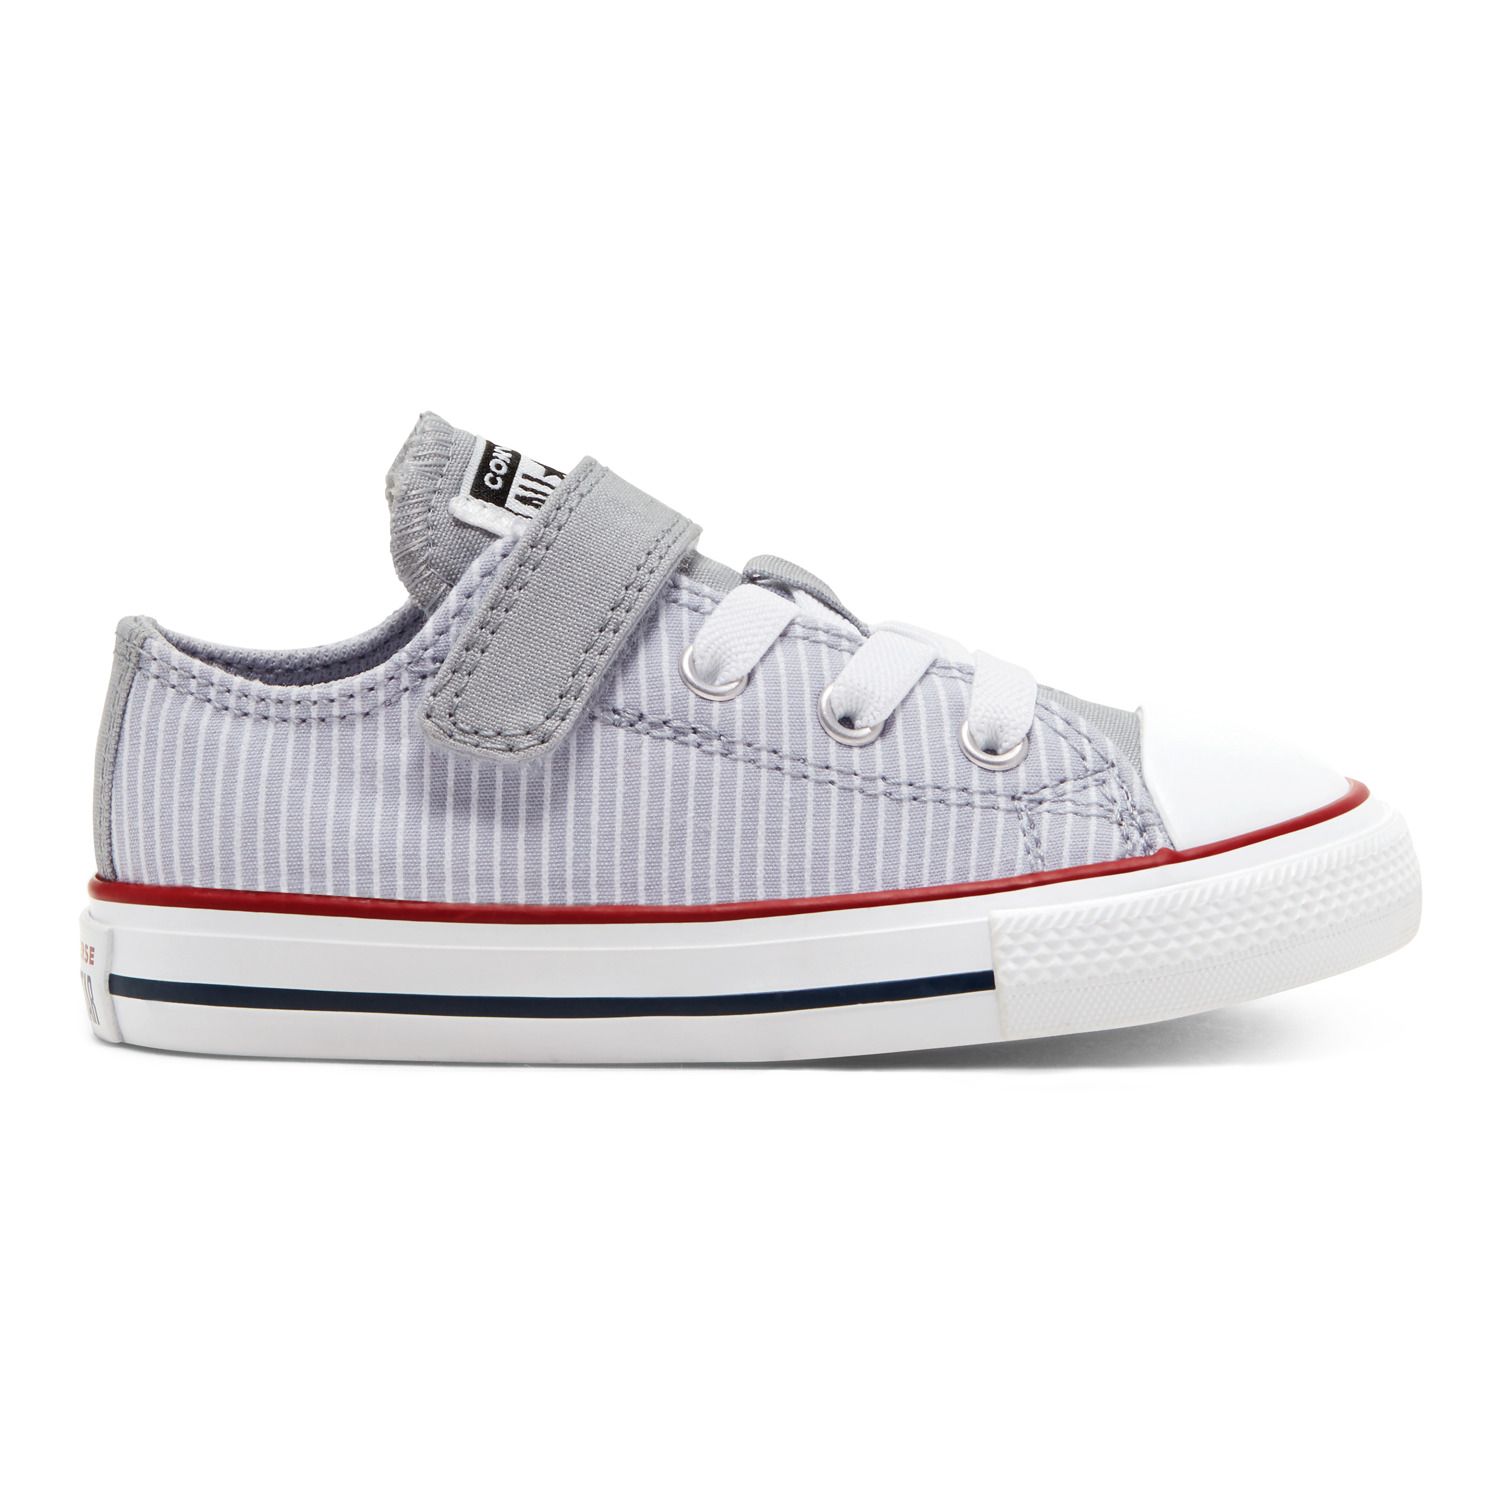 converse shoes for toddler boy